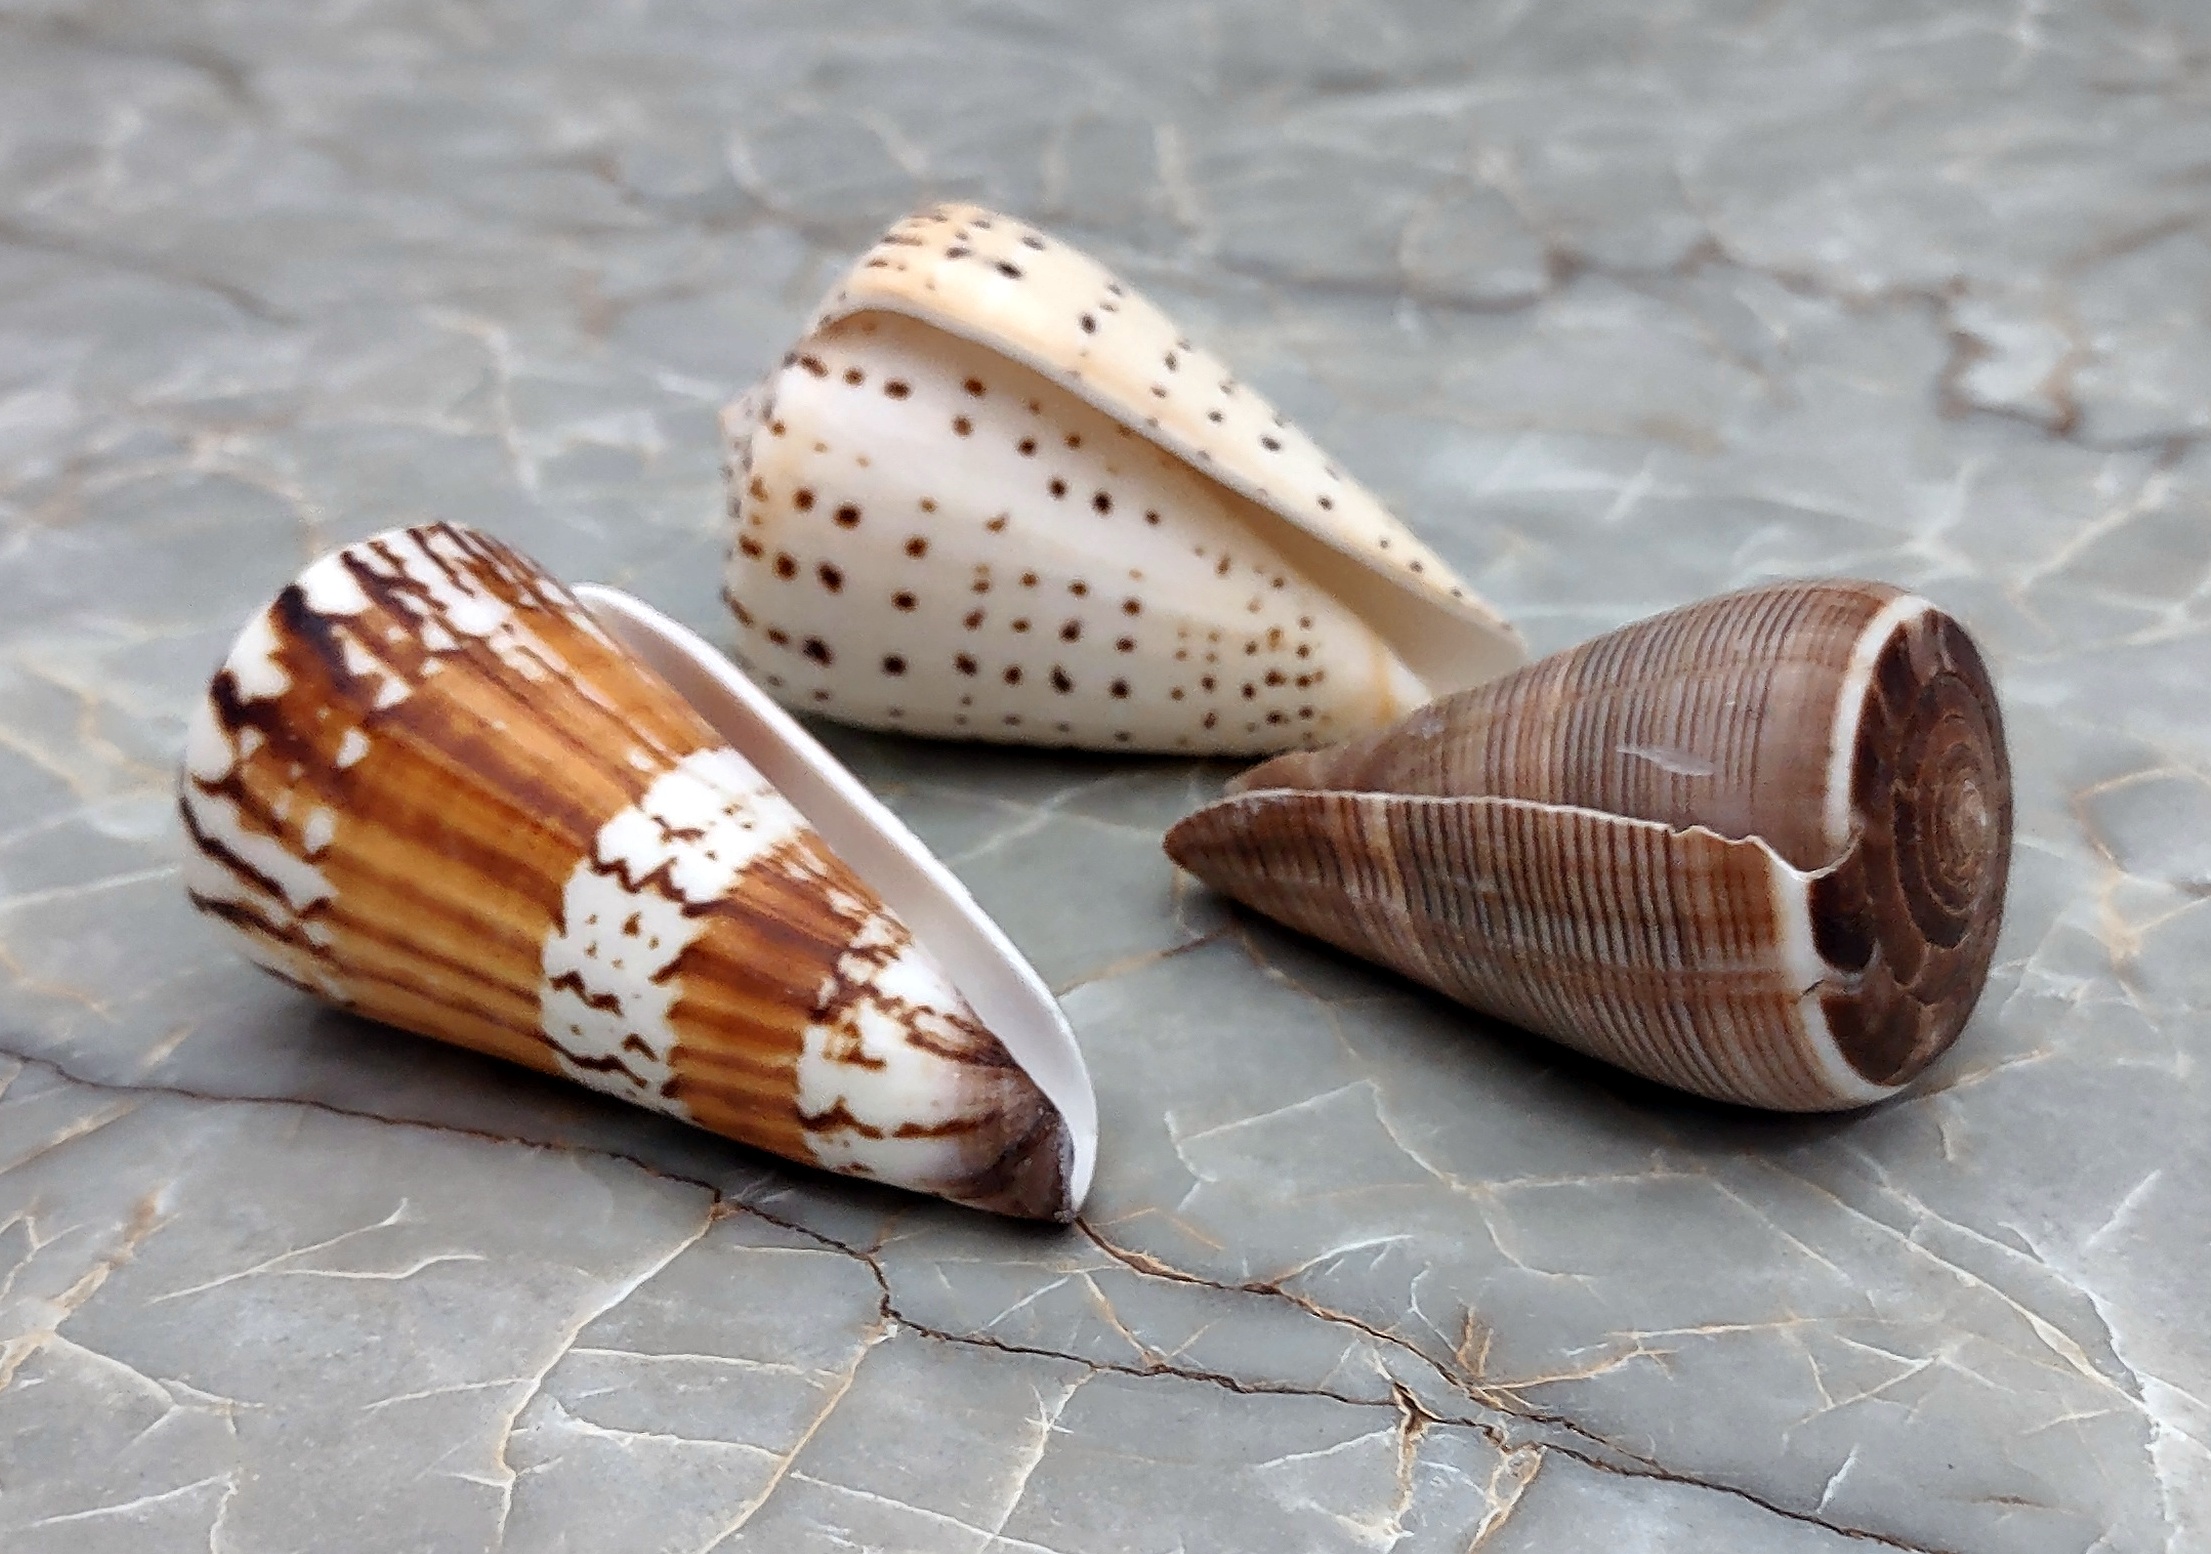 Lot of 6 Small Spiral Pointed Cone Shells 1 to 1-1/2 length